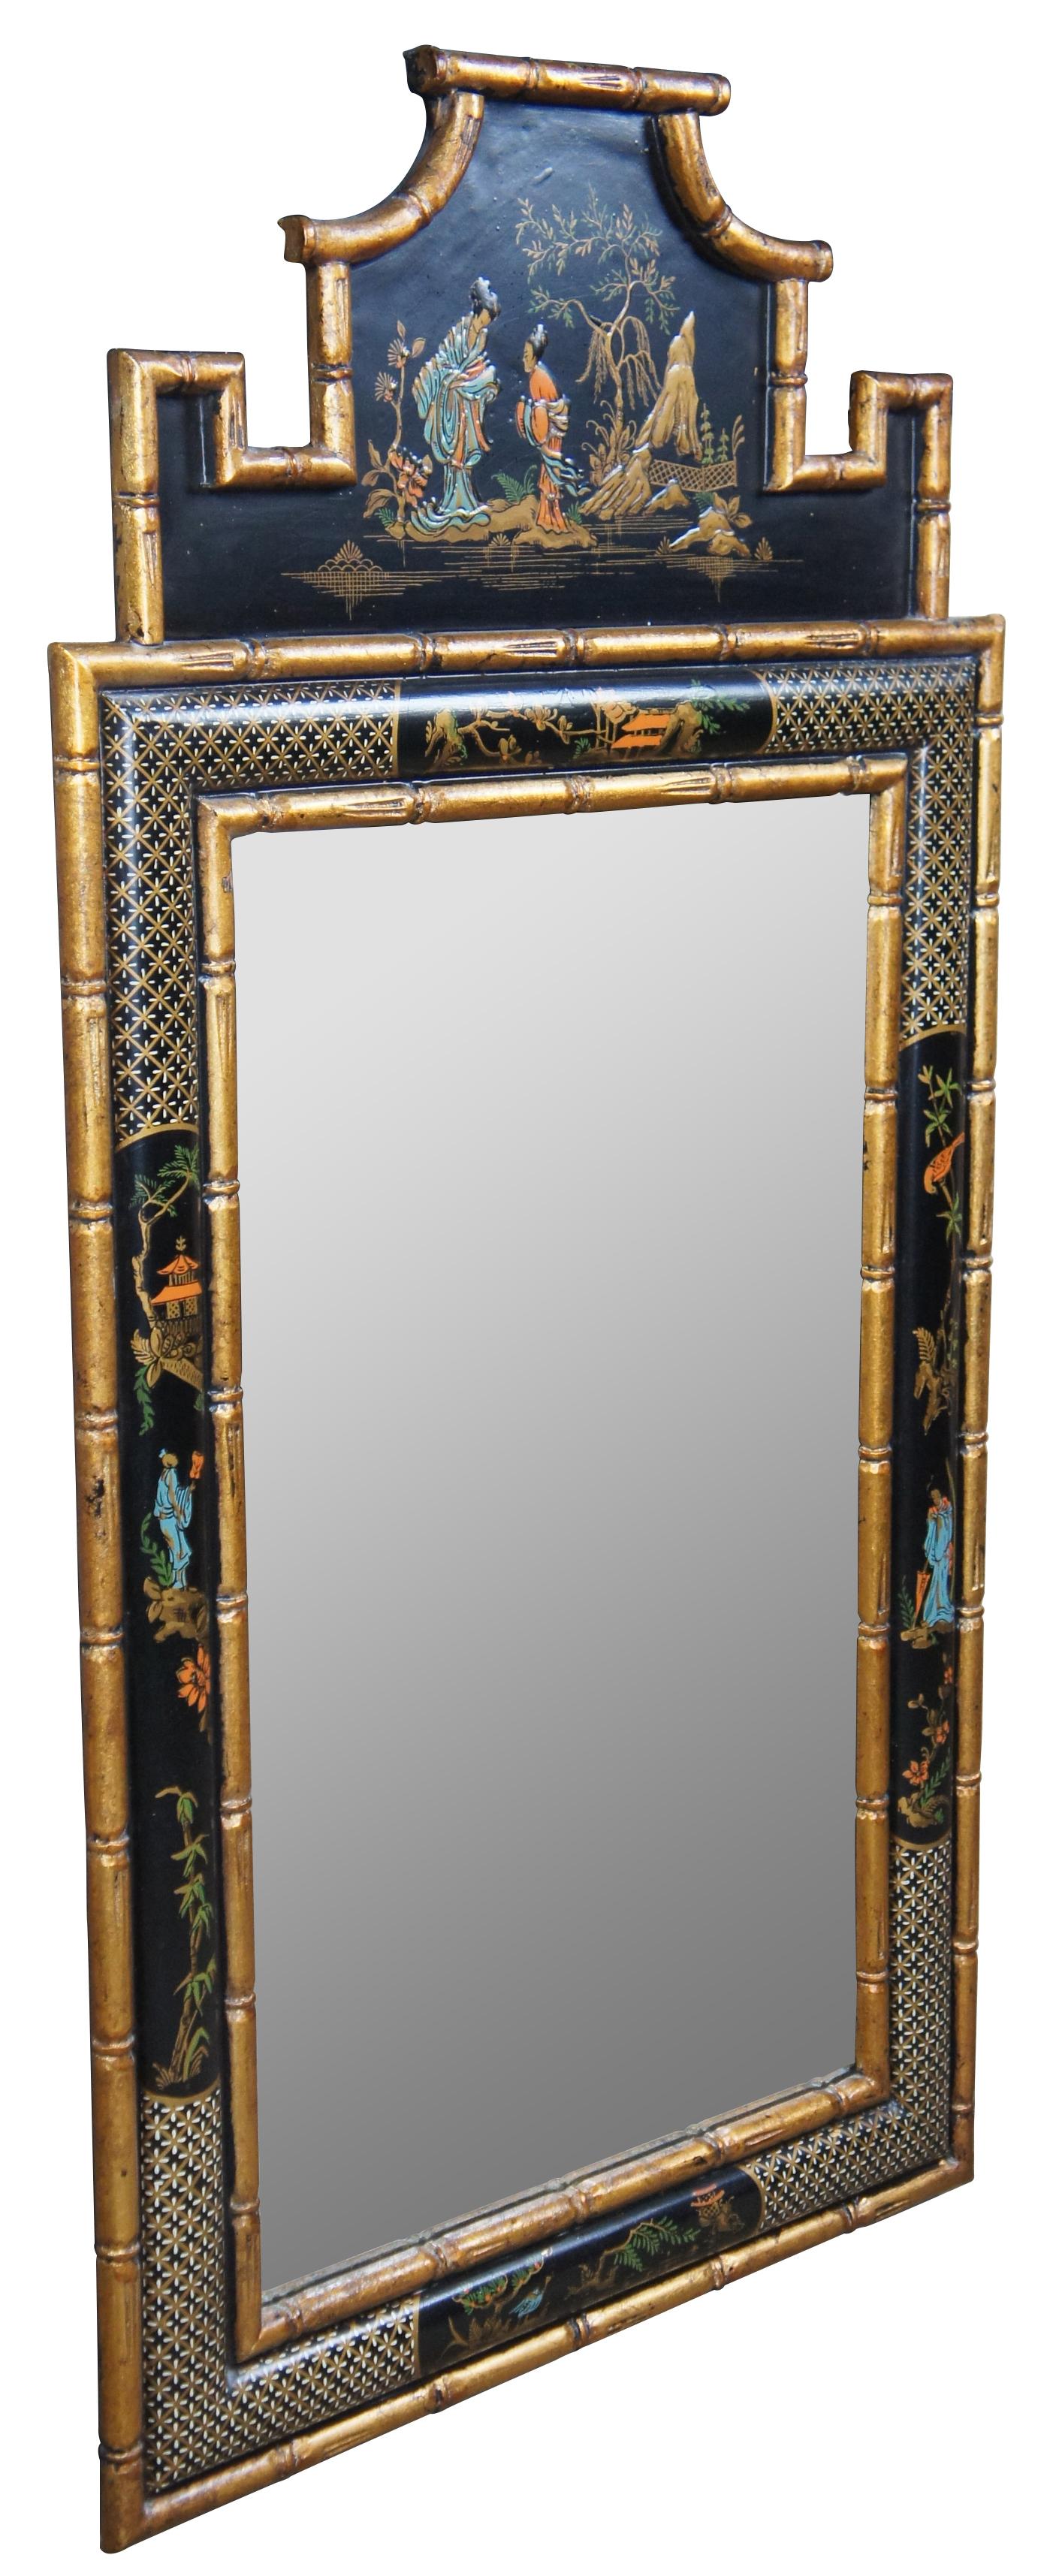 Late 20th century Chinese pagoda mirror. Features black lacquer and faux bamboo with painted figural geisha scenes, birds, and tress, circa 1980s. Measure: 55